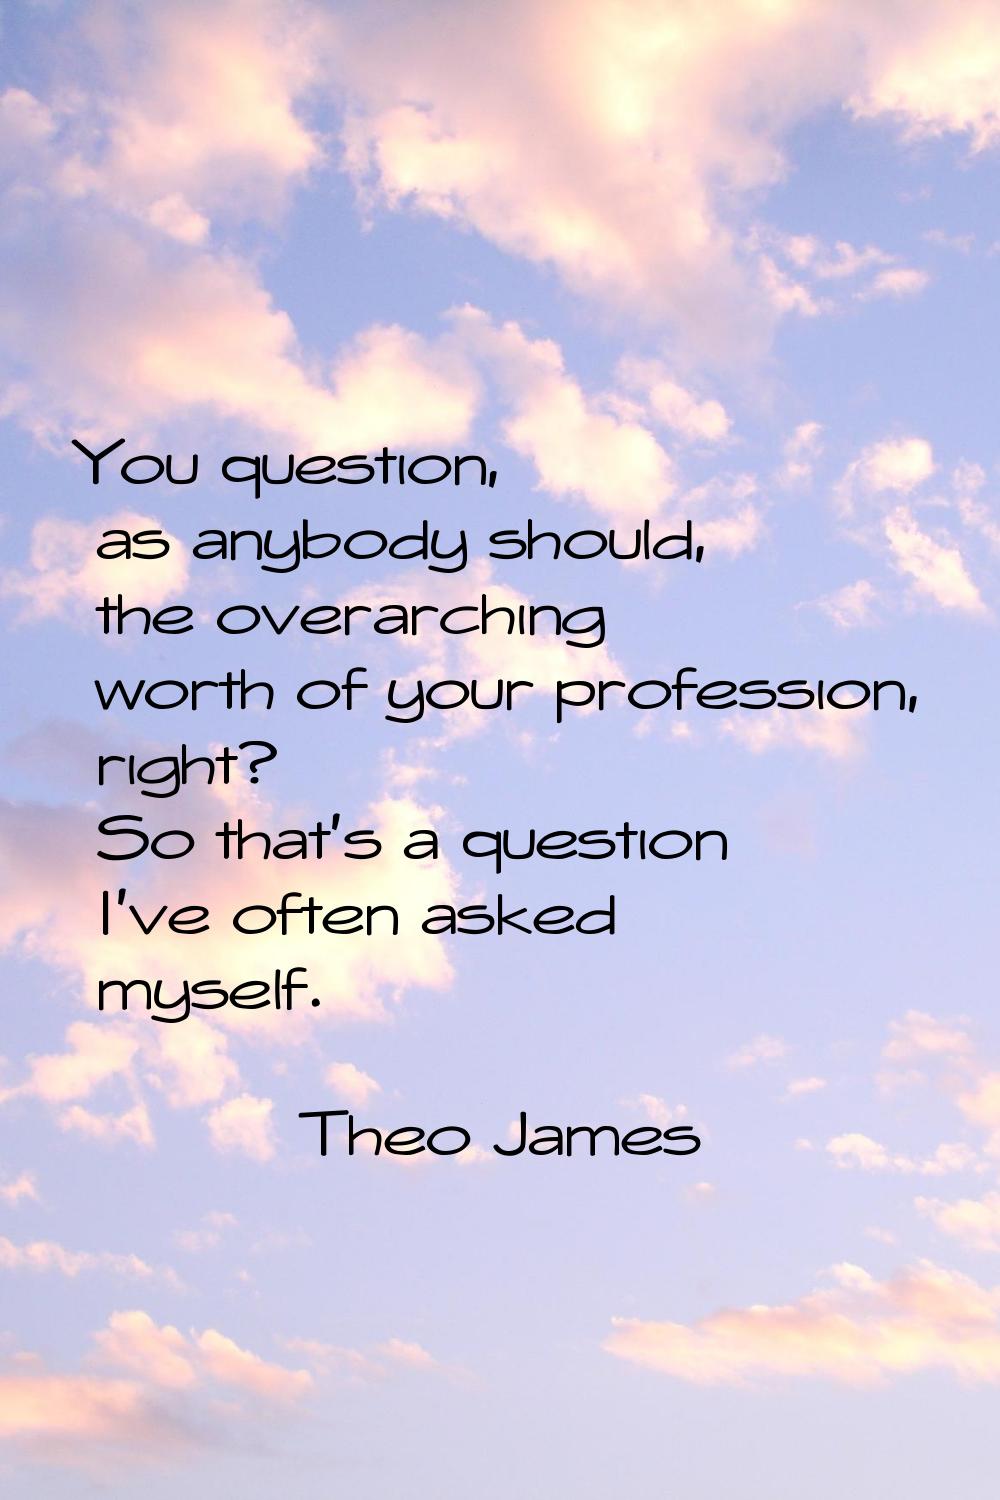 You question, as anybody should, the overarching worth of your profession, right? So that's a quest